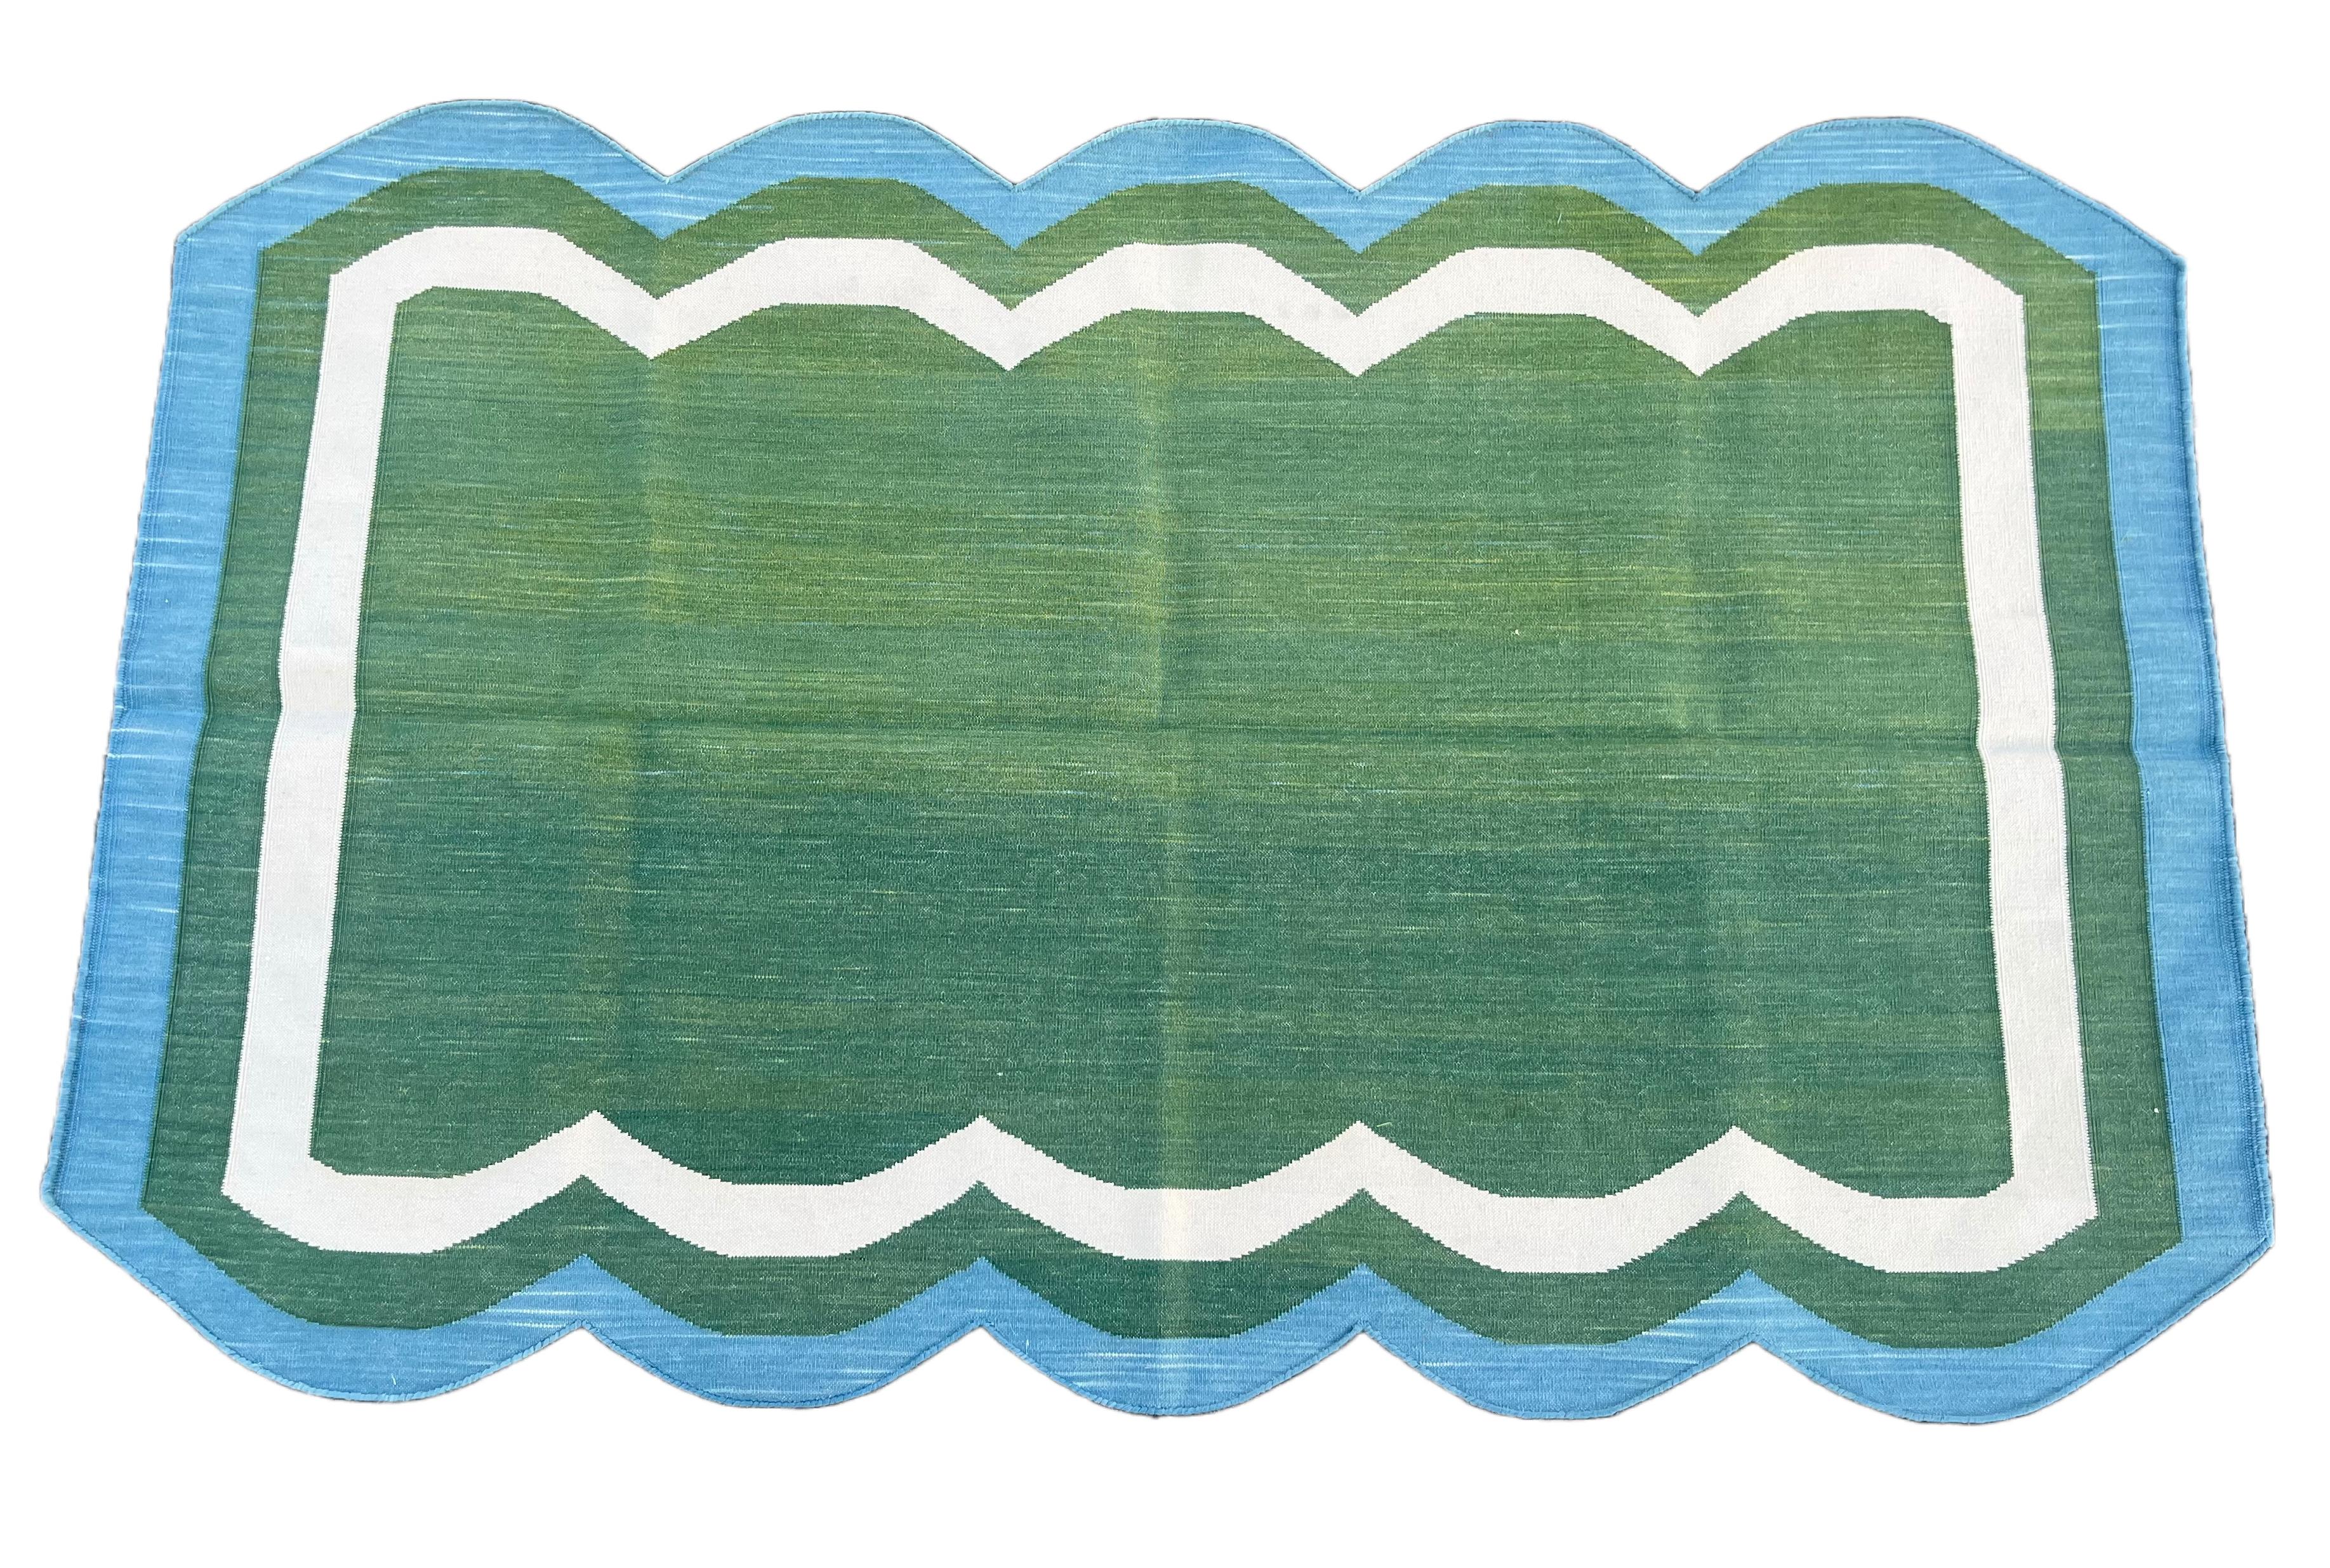 Cotton Vegetable Dyed Reversible Forest Green And Blue Two Sided Scalloped Indian Rug - 3'x5'
(Scallops runs on 5' sides)
These special flat-weave dhurries are hand-woven with 15 ply 100% cotton yarn. Due to the special manufacturing techniques used